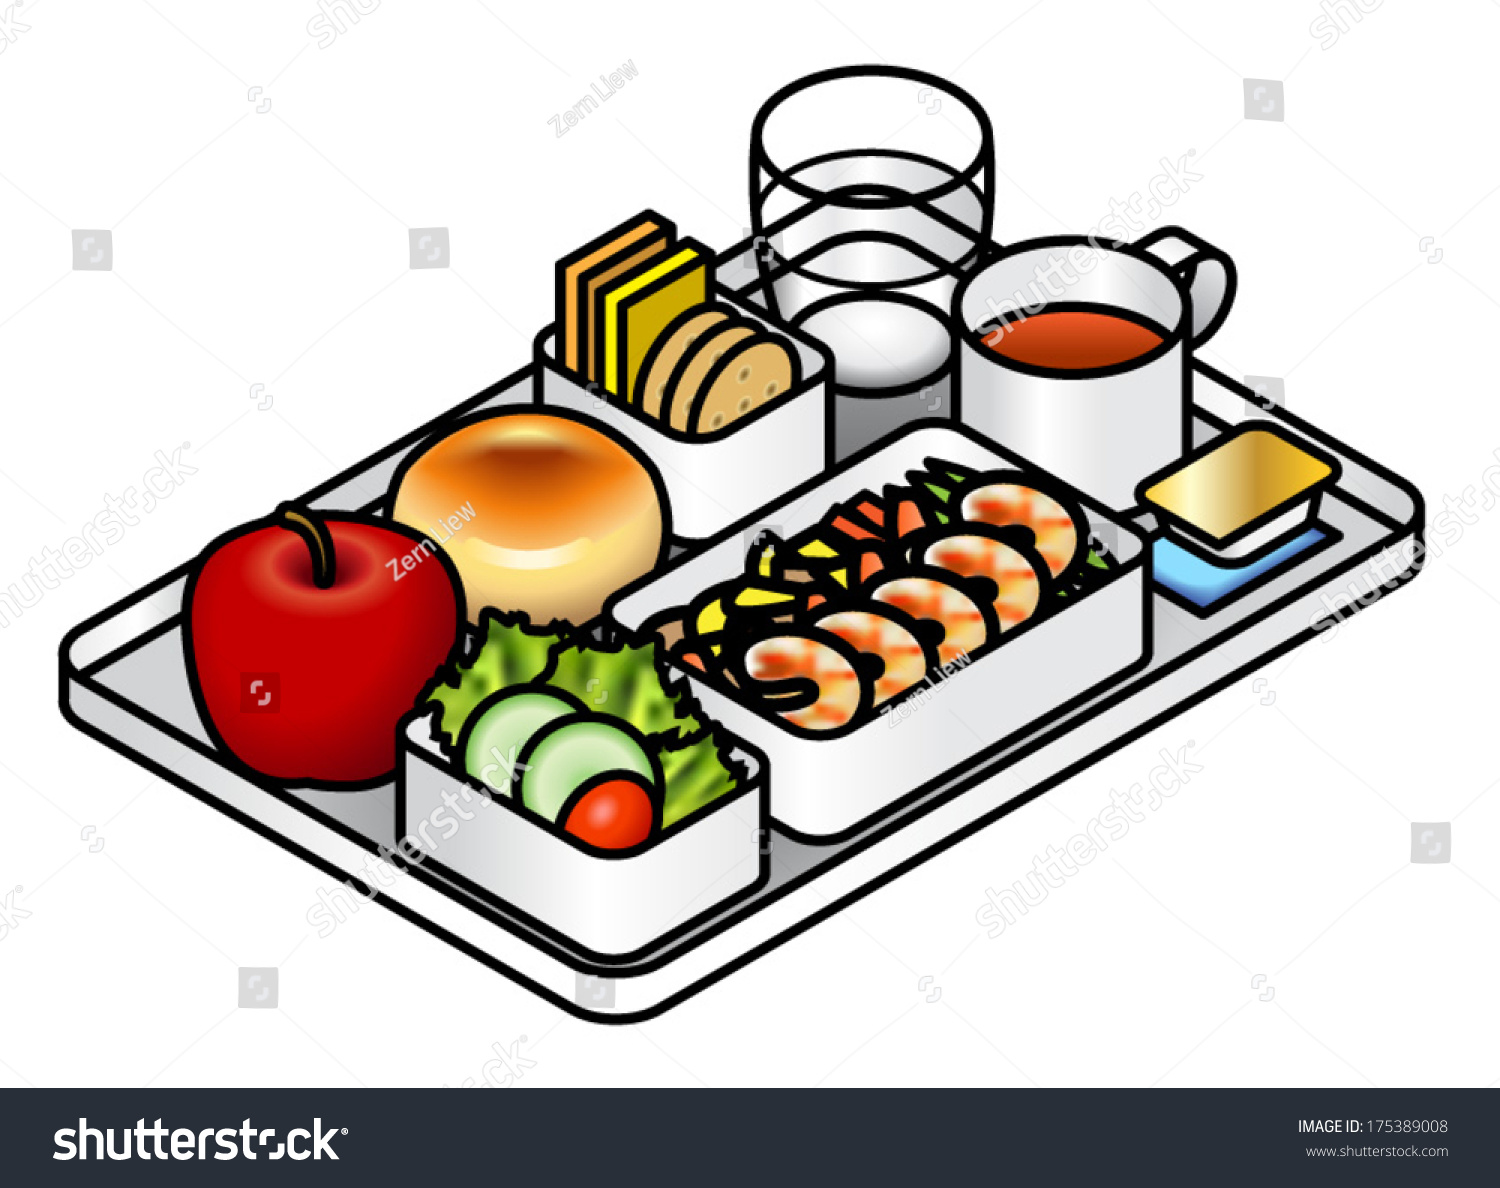 Airline Meal Lunchdinner On Tray Water Stock Vector 175389008 ...